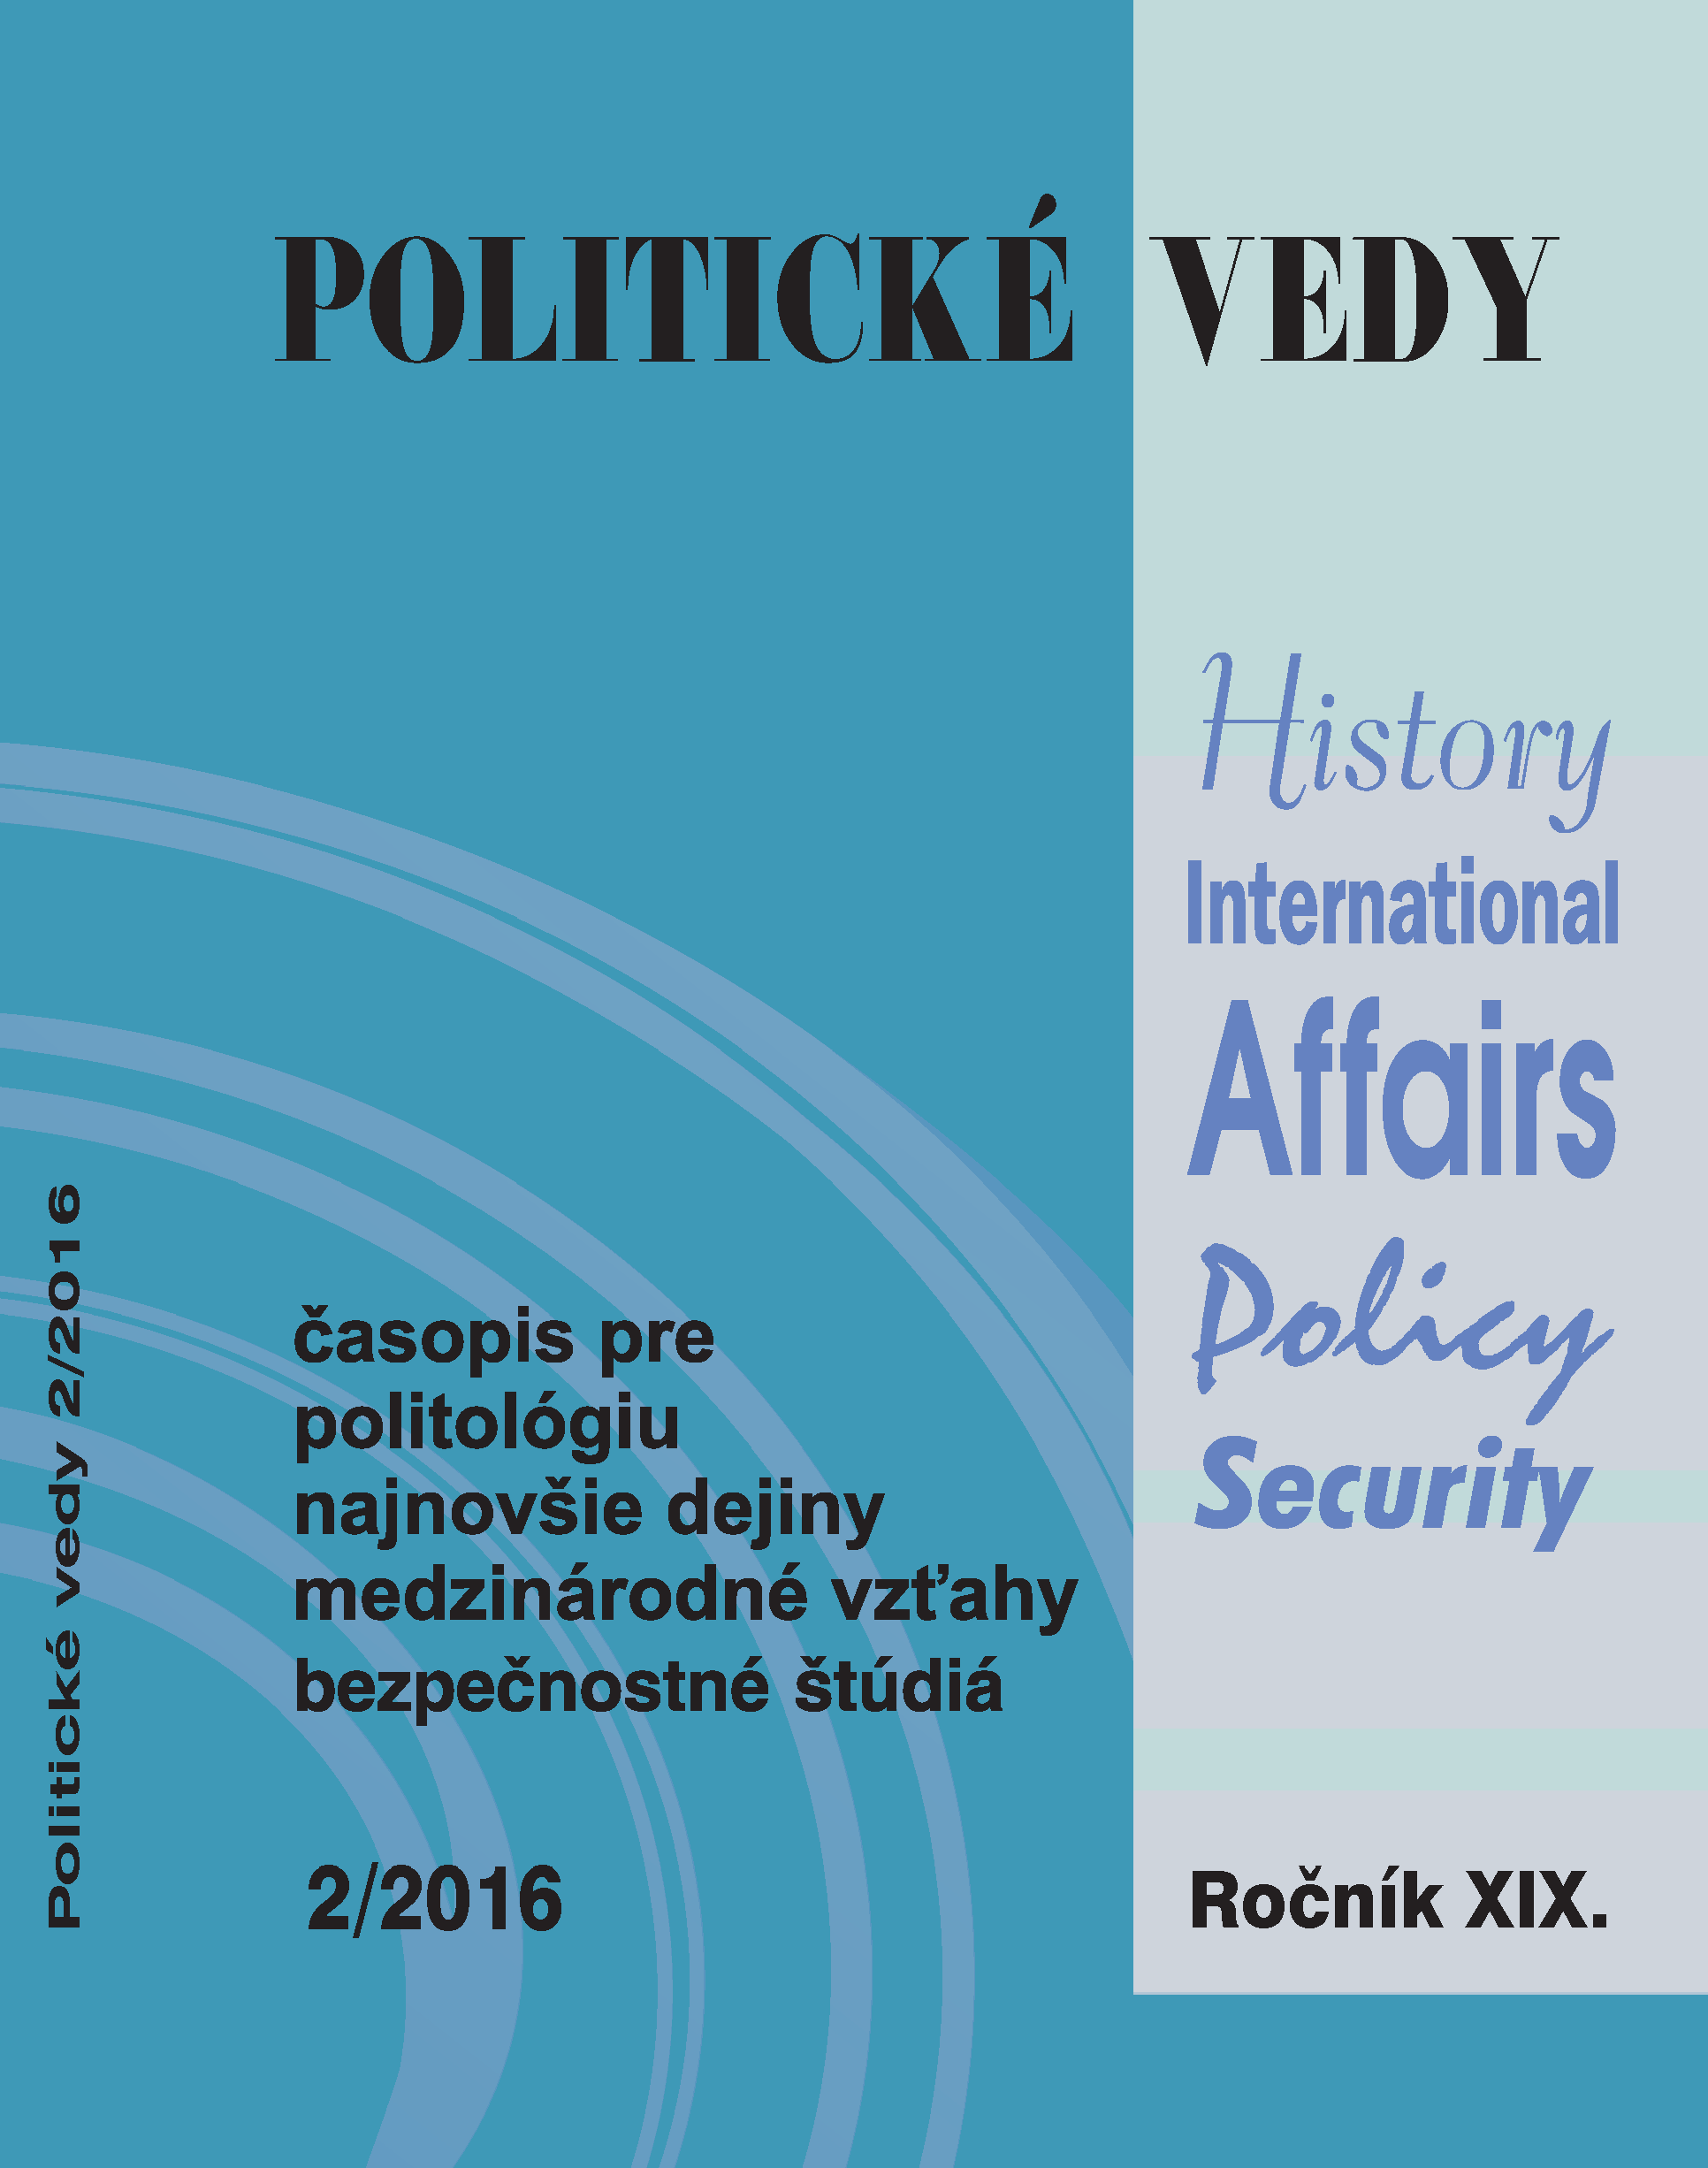 Party of Free Citizens and the Genesis 
of the Czech Liberal-Conservative “Anti-EU” Stream in Czech Politics